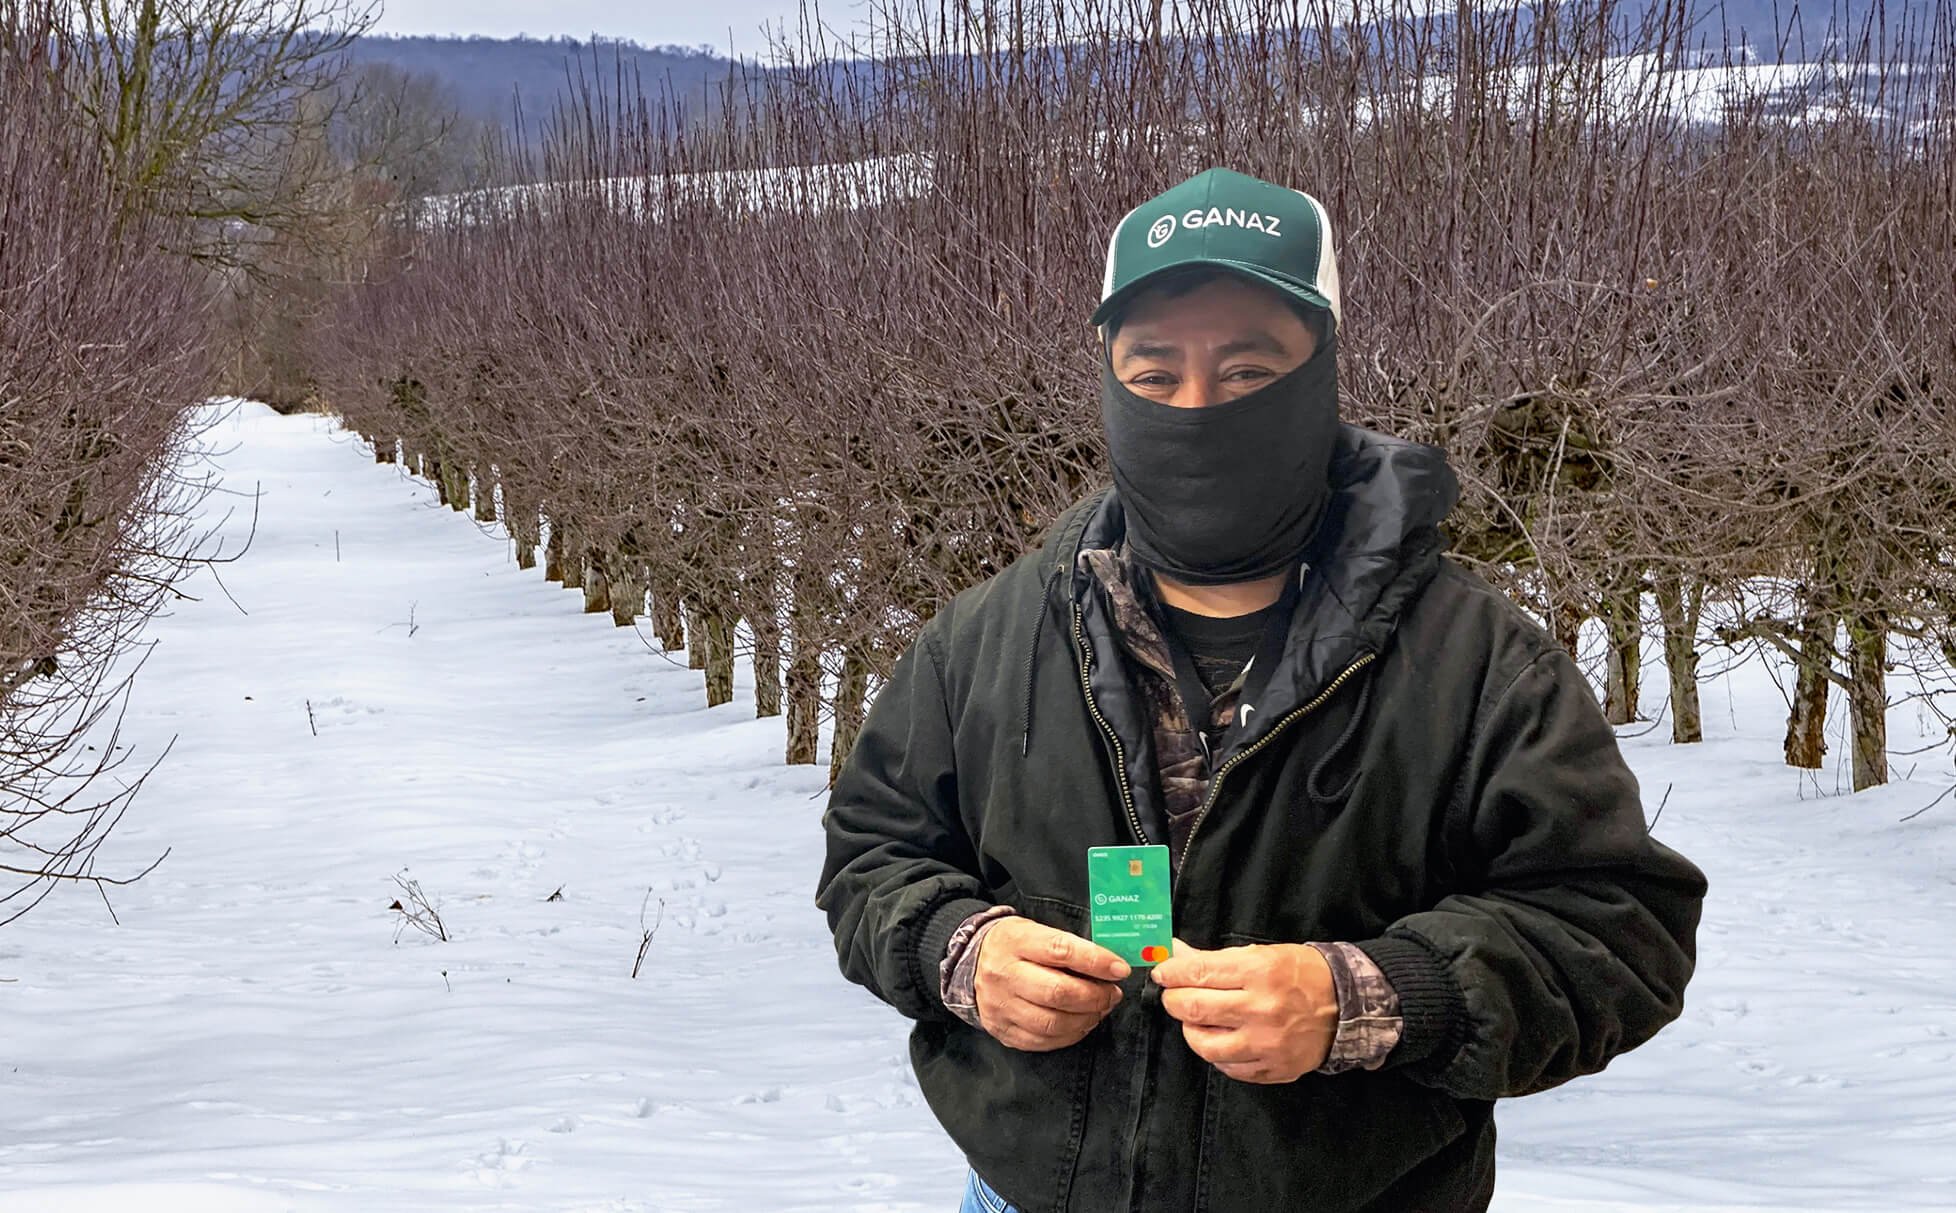 Mauricio holding a Ganaz Payroll Card in an apply orchard in winter